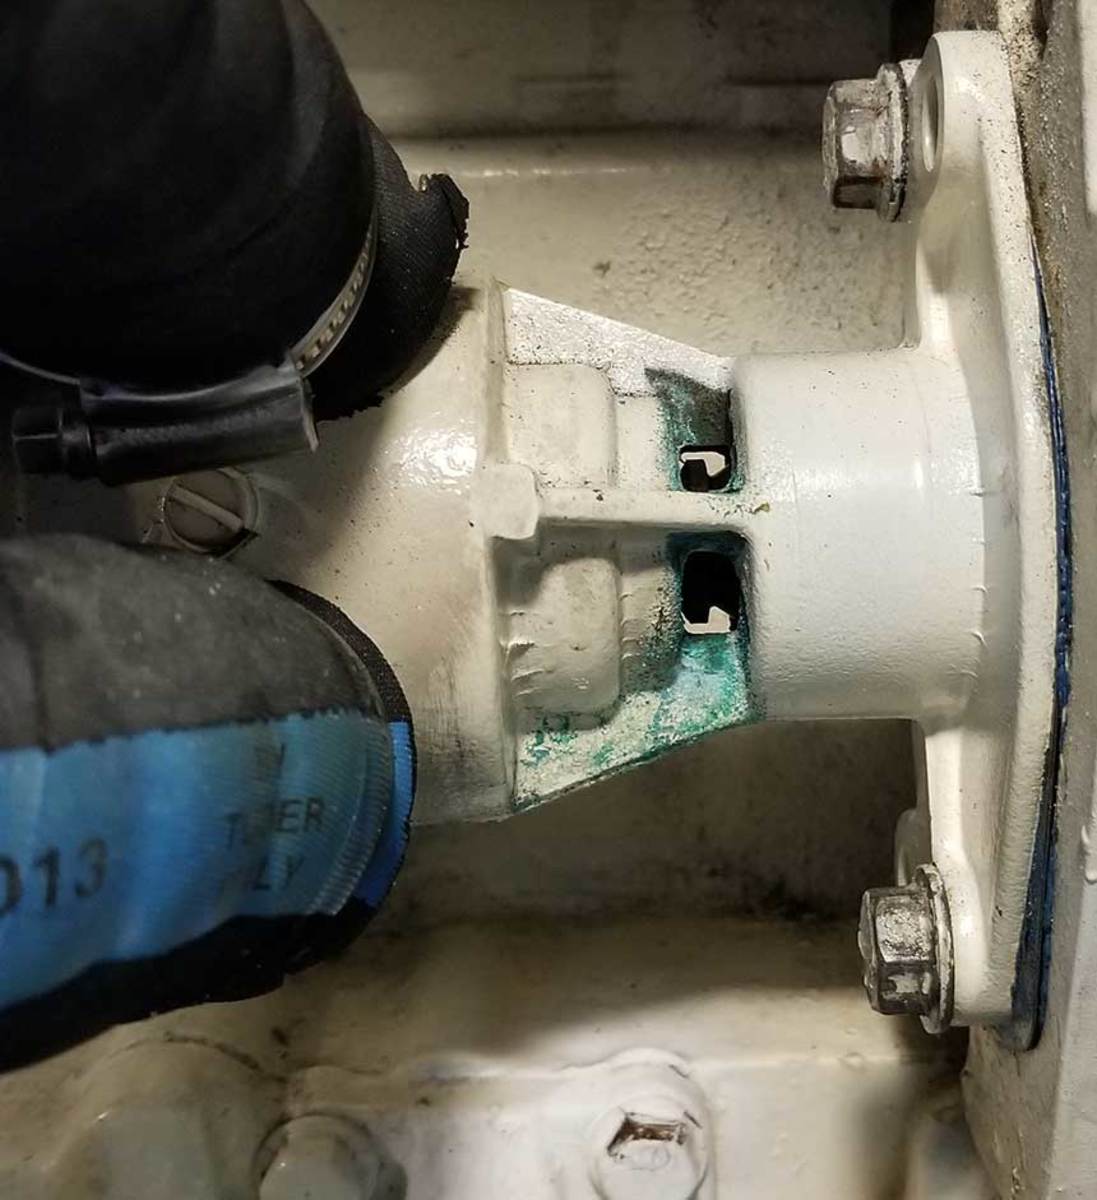 The engine seawater pump has openings that will reveal oil or seawater leaks through failing seals. The green verdigris in this image suggests a leaking seal on the seawater side. 